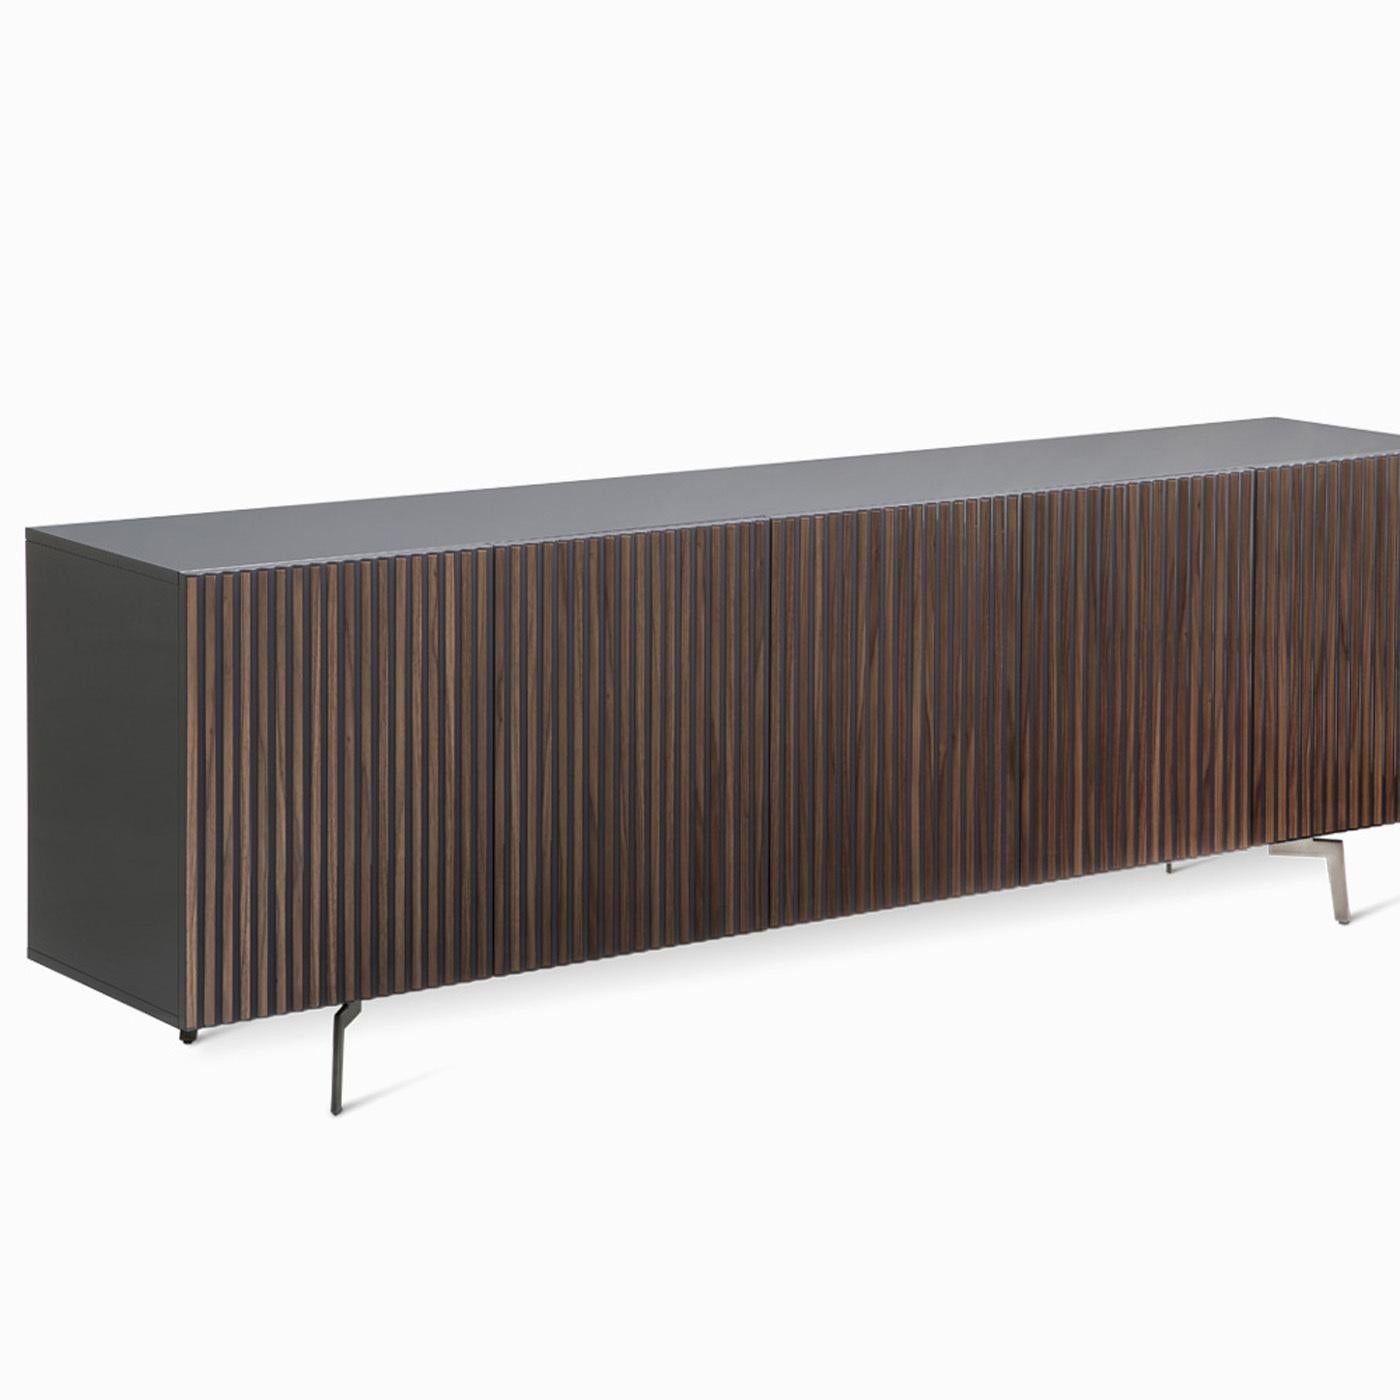 A capacious and elegant sideboard, this piece features five doors and spectacular allure. An exercise in contrasts, the black-lacquered wooden frame is sleek and essential, enriched with Canaletto walnut wood vertical inserts on the front panels.